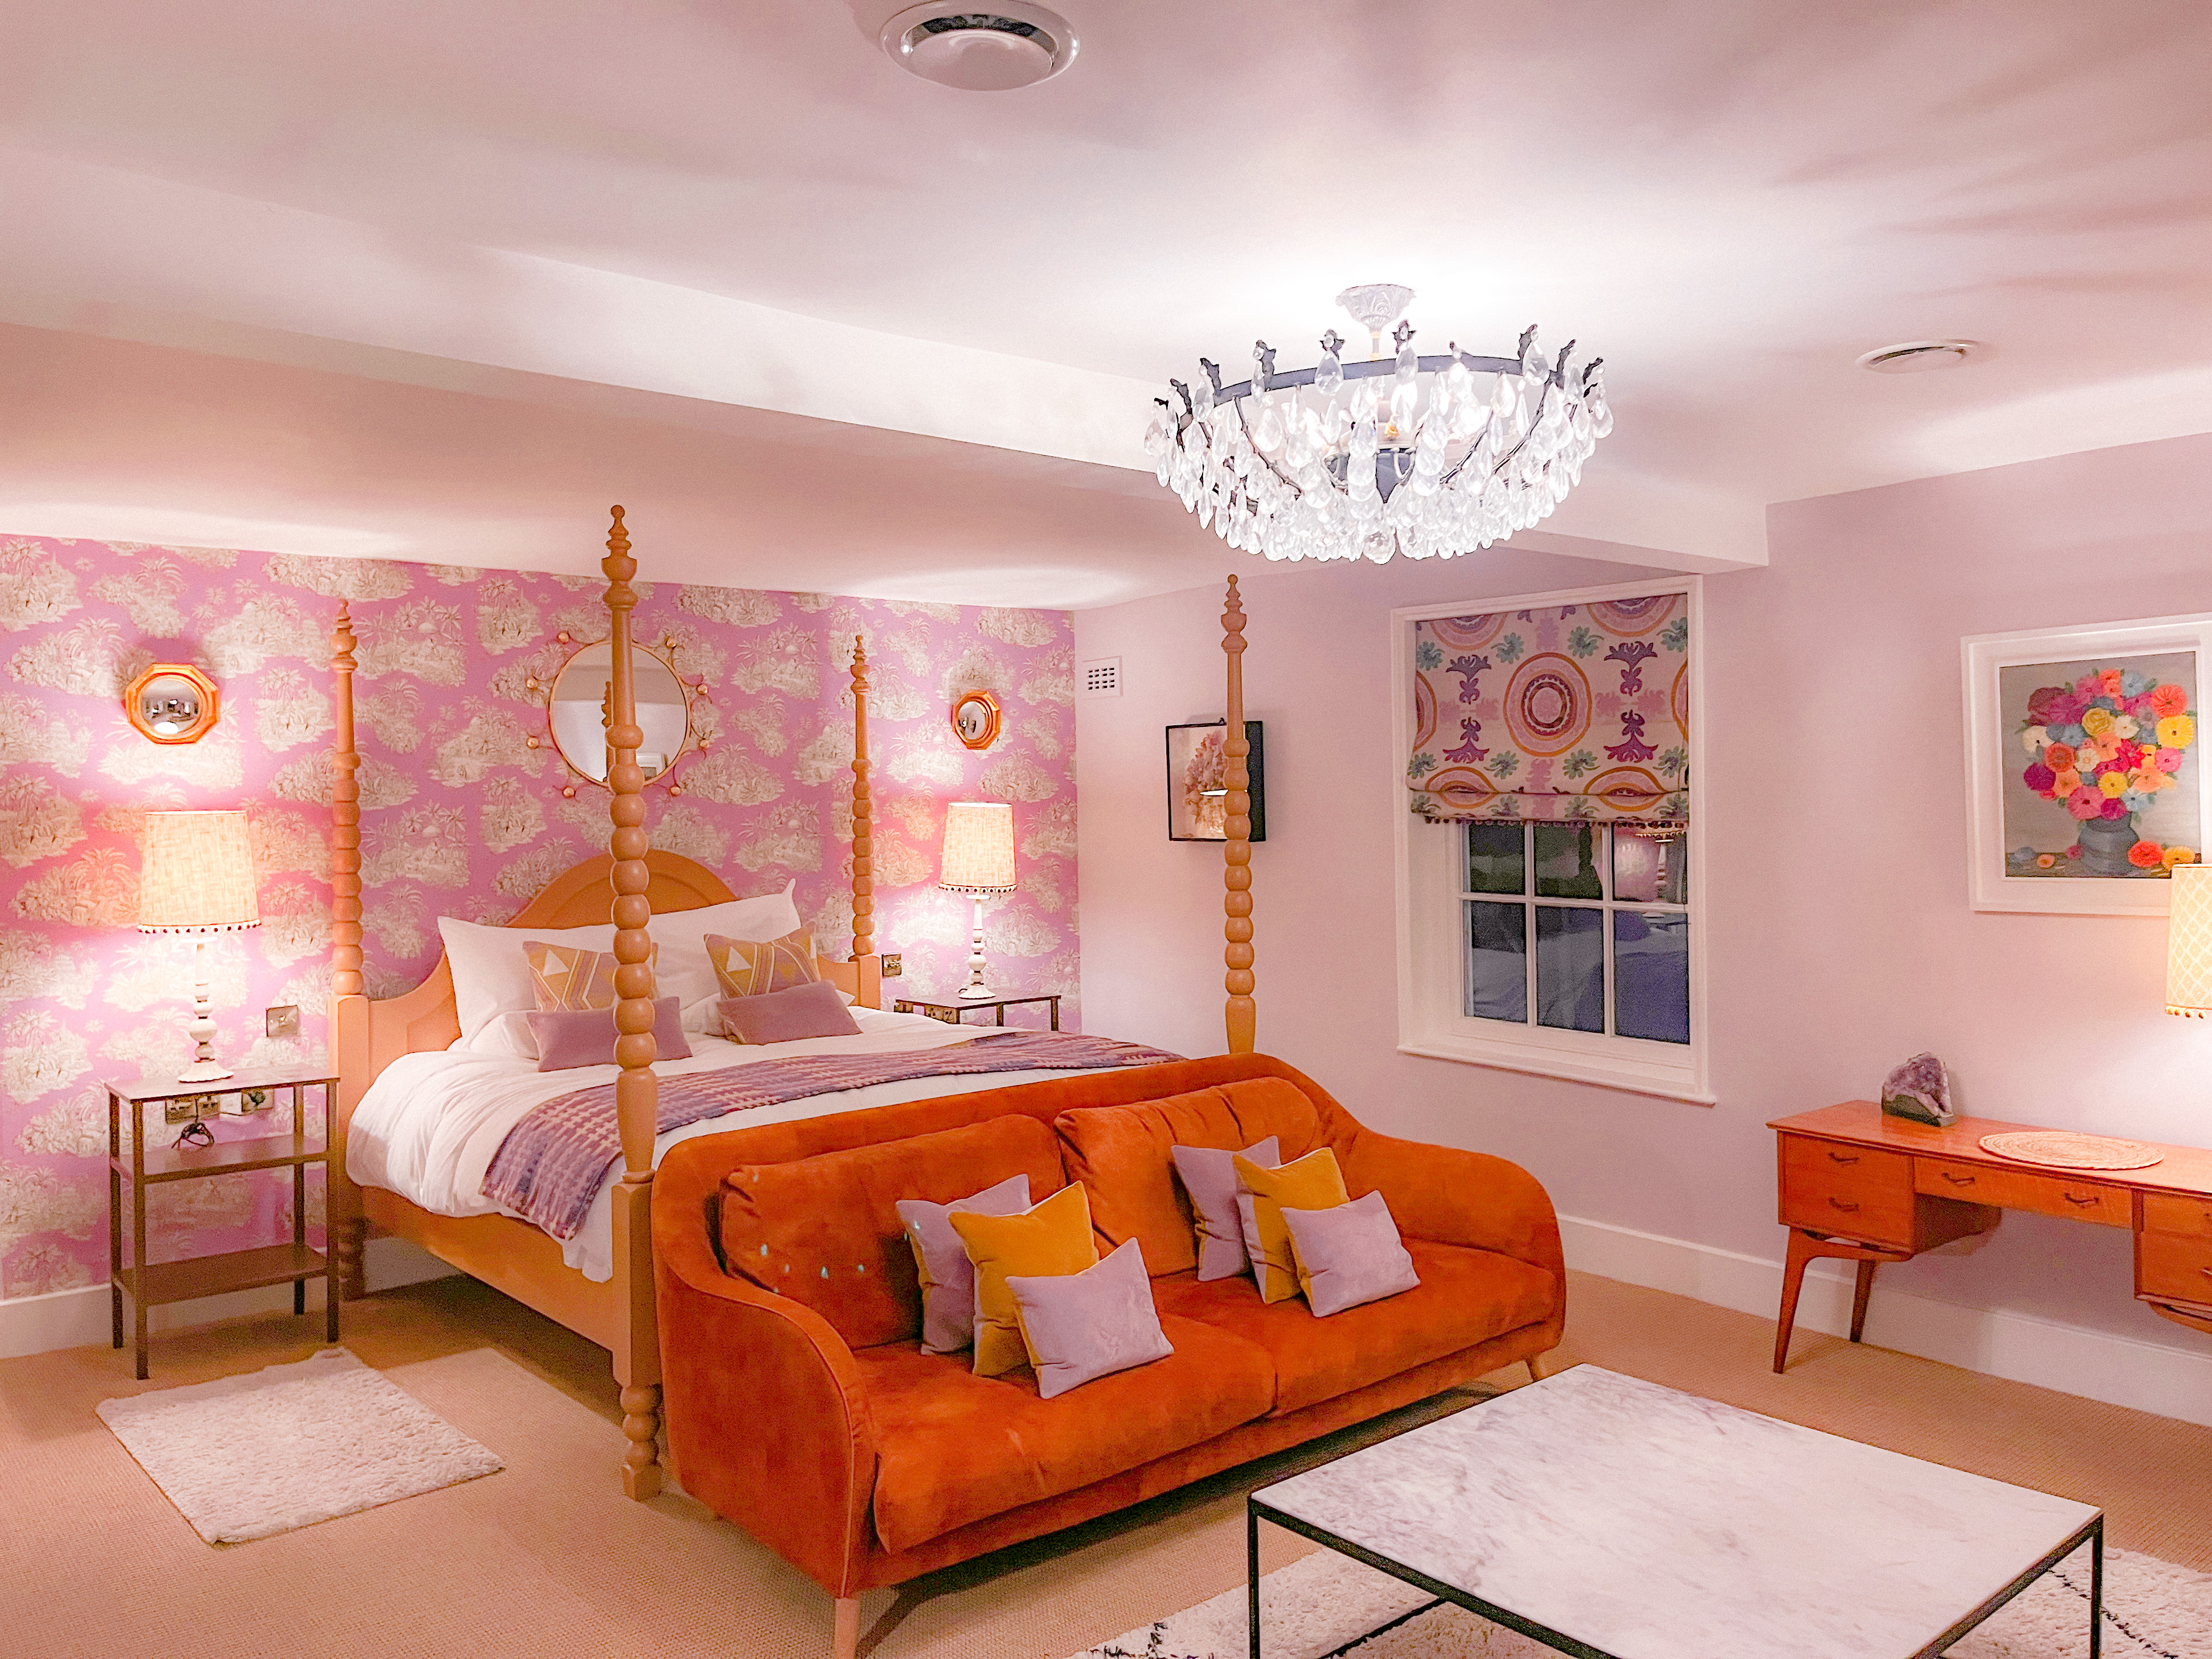 A luxury hotel room with colourful wall paper, a modern four poster bed and a bright orange sofa perched at the end of it